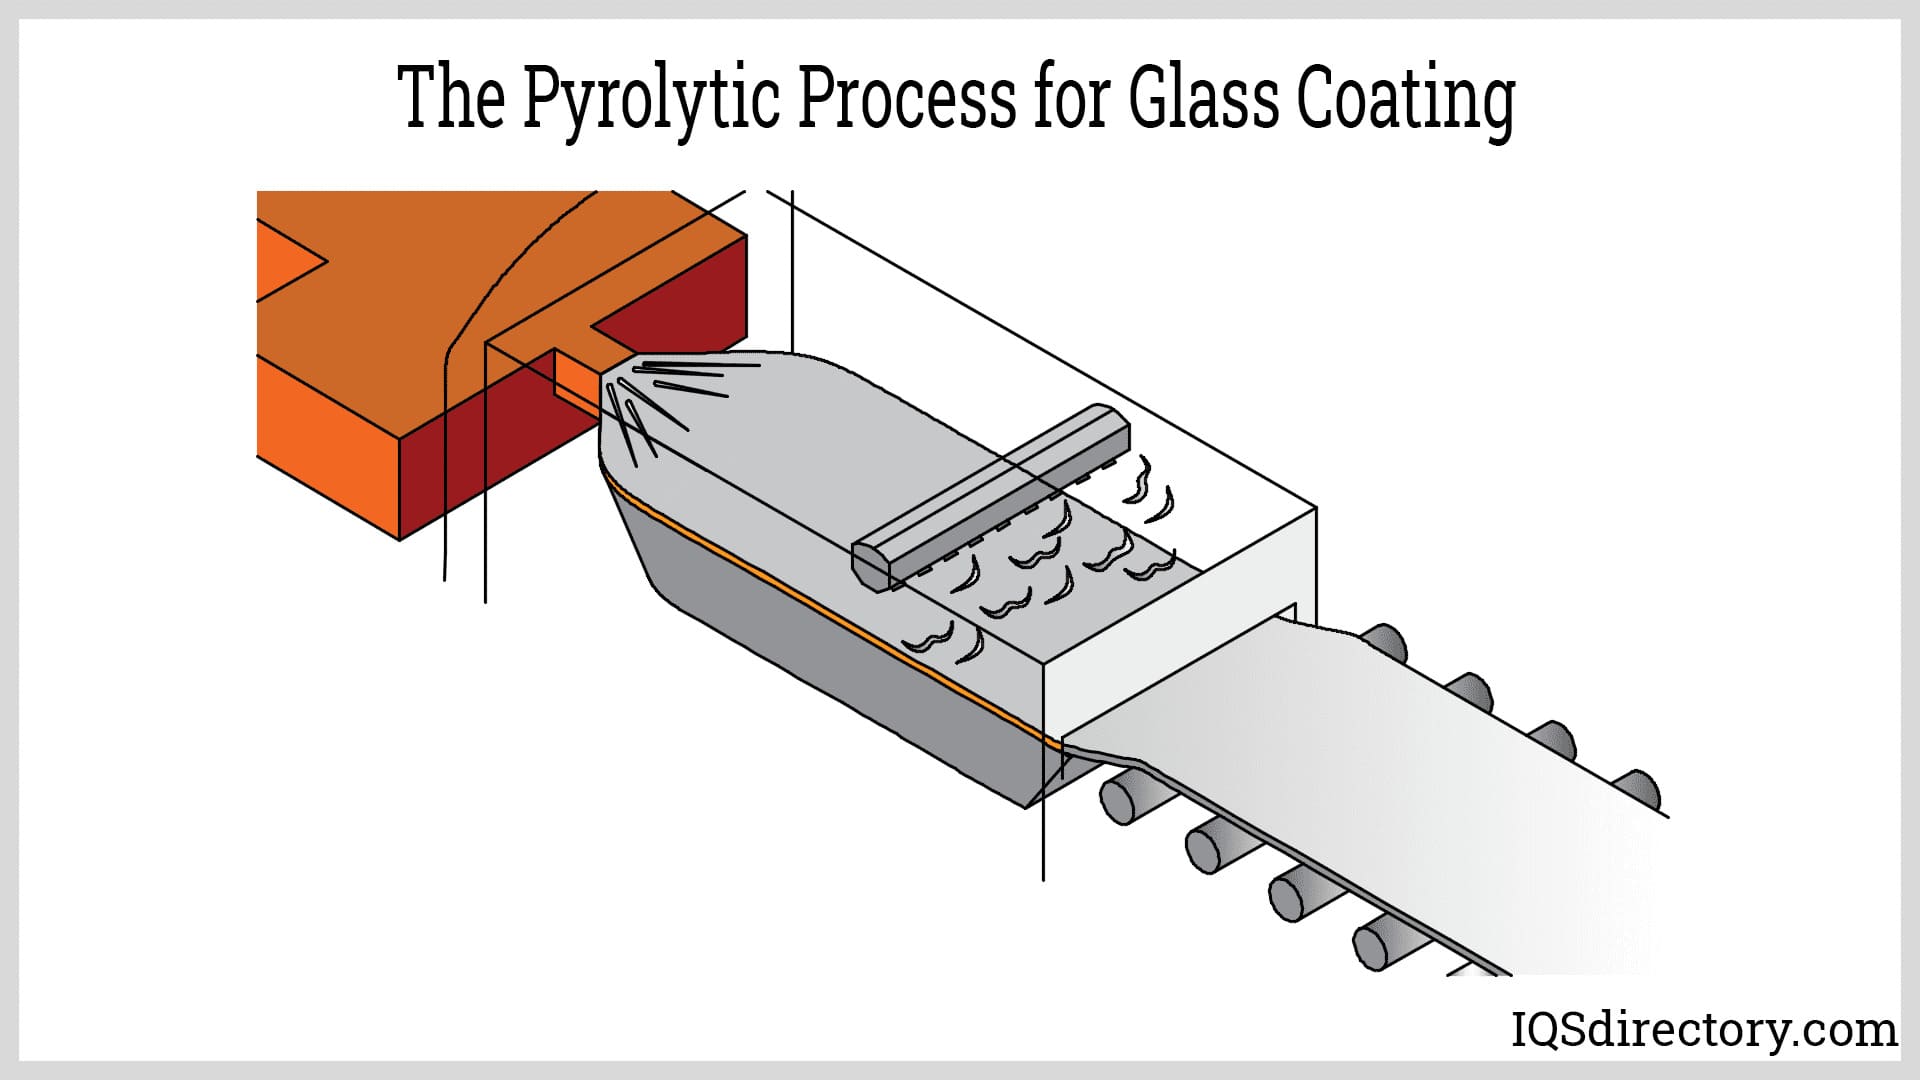 The Pyrolytic Process for Glass Coating